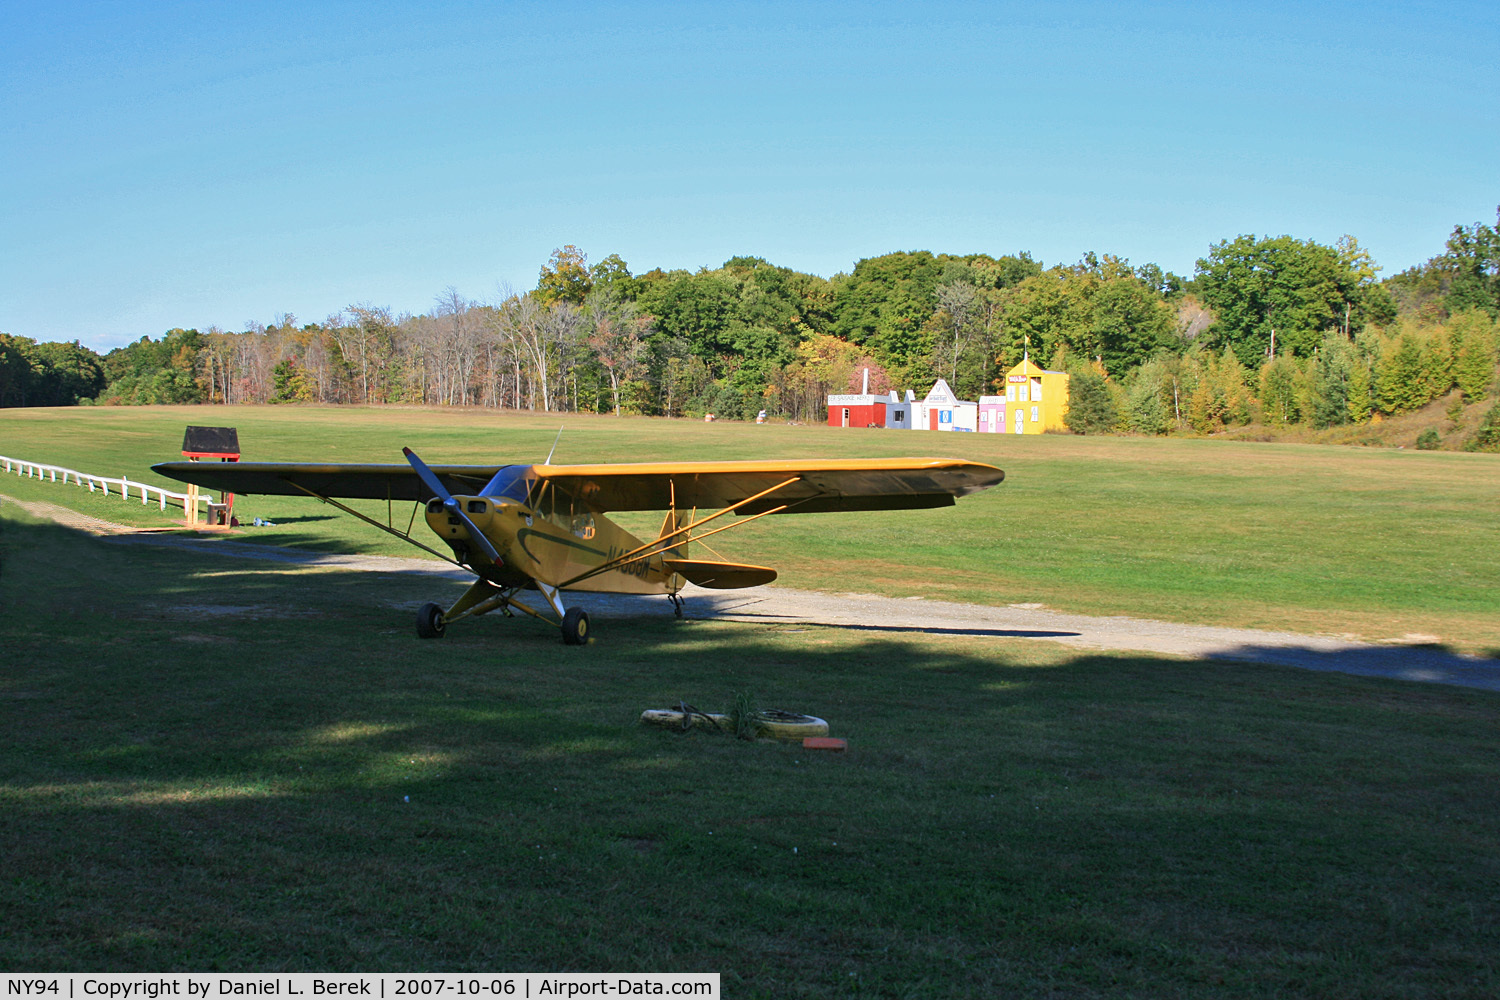 Old Rhinebeck Airport (NY94) - The main turf runway is surrounded by make-believe buildings that are part of the backdrop of the WWI reenactments that take place.